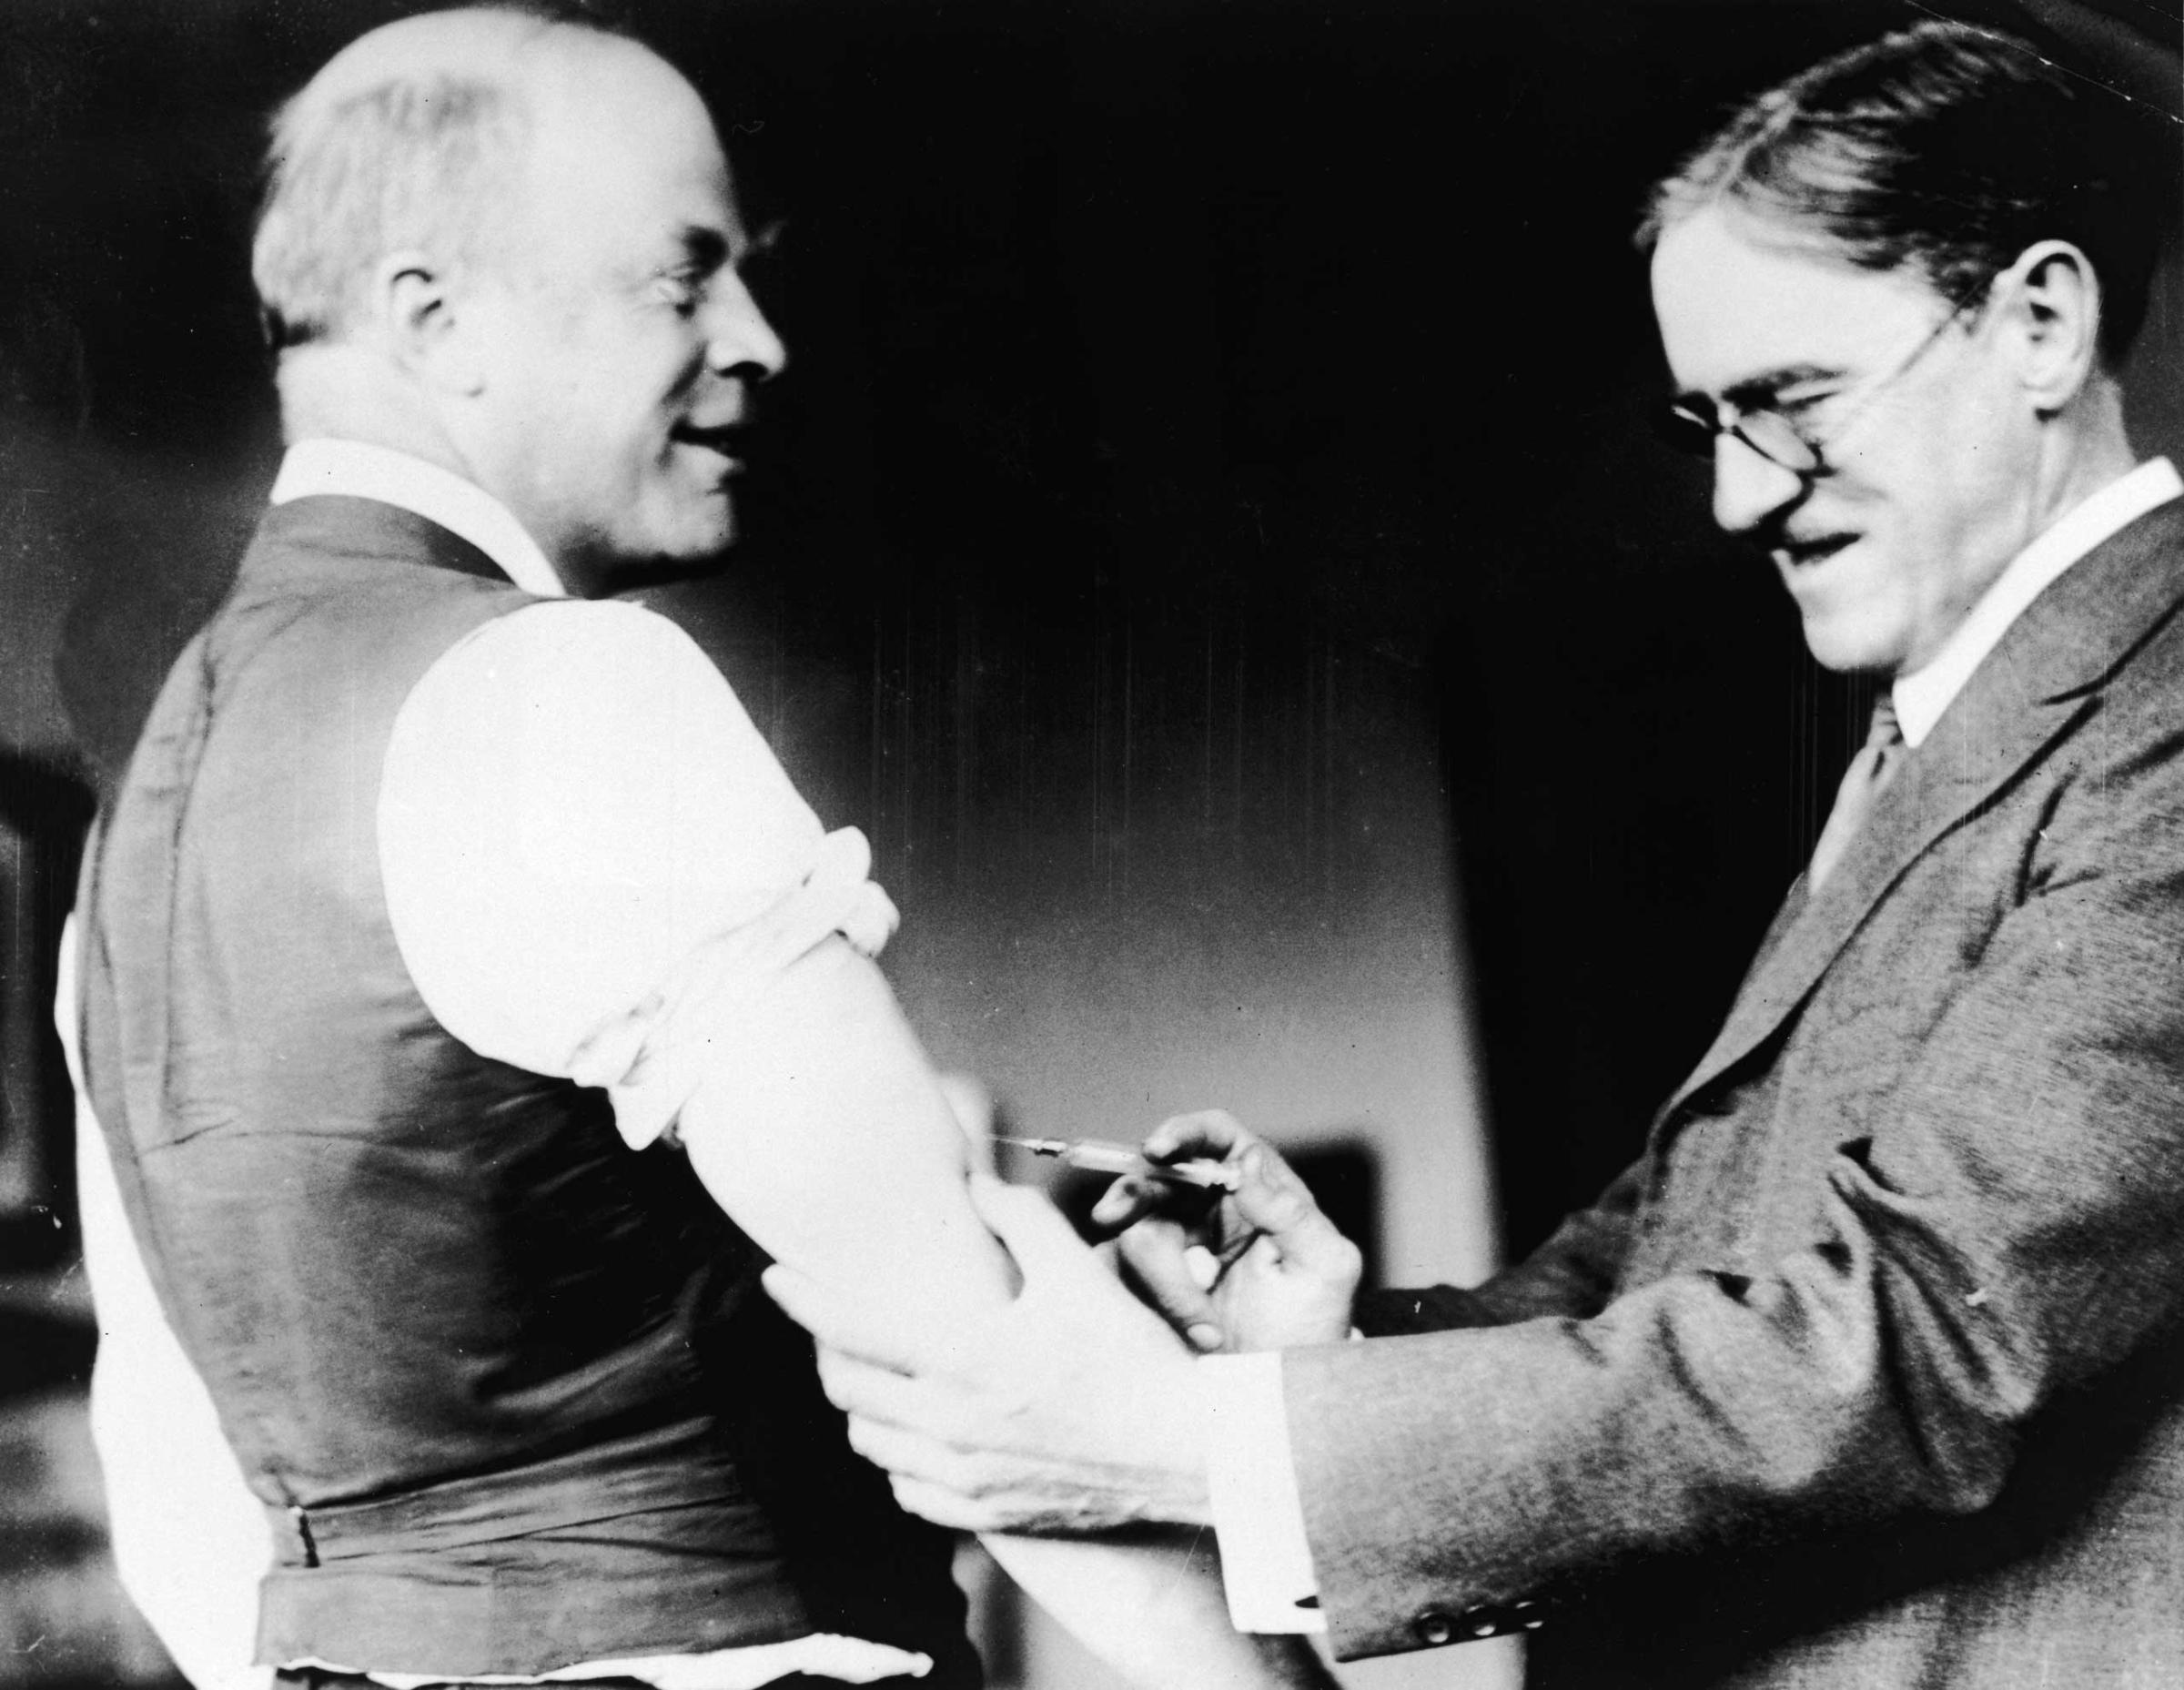 A doctor inoculates Major Peters of Boston against the Influenza virus during the pandemic, 1918.